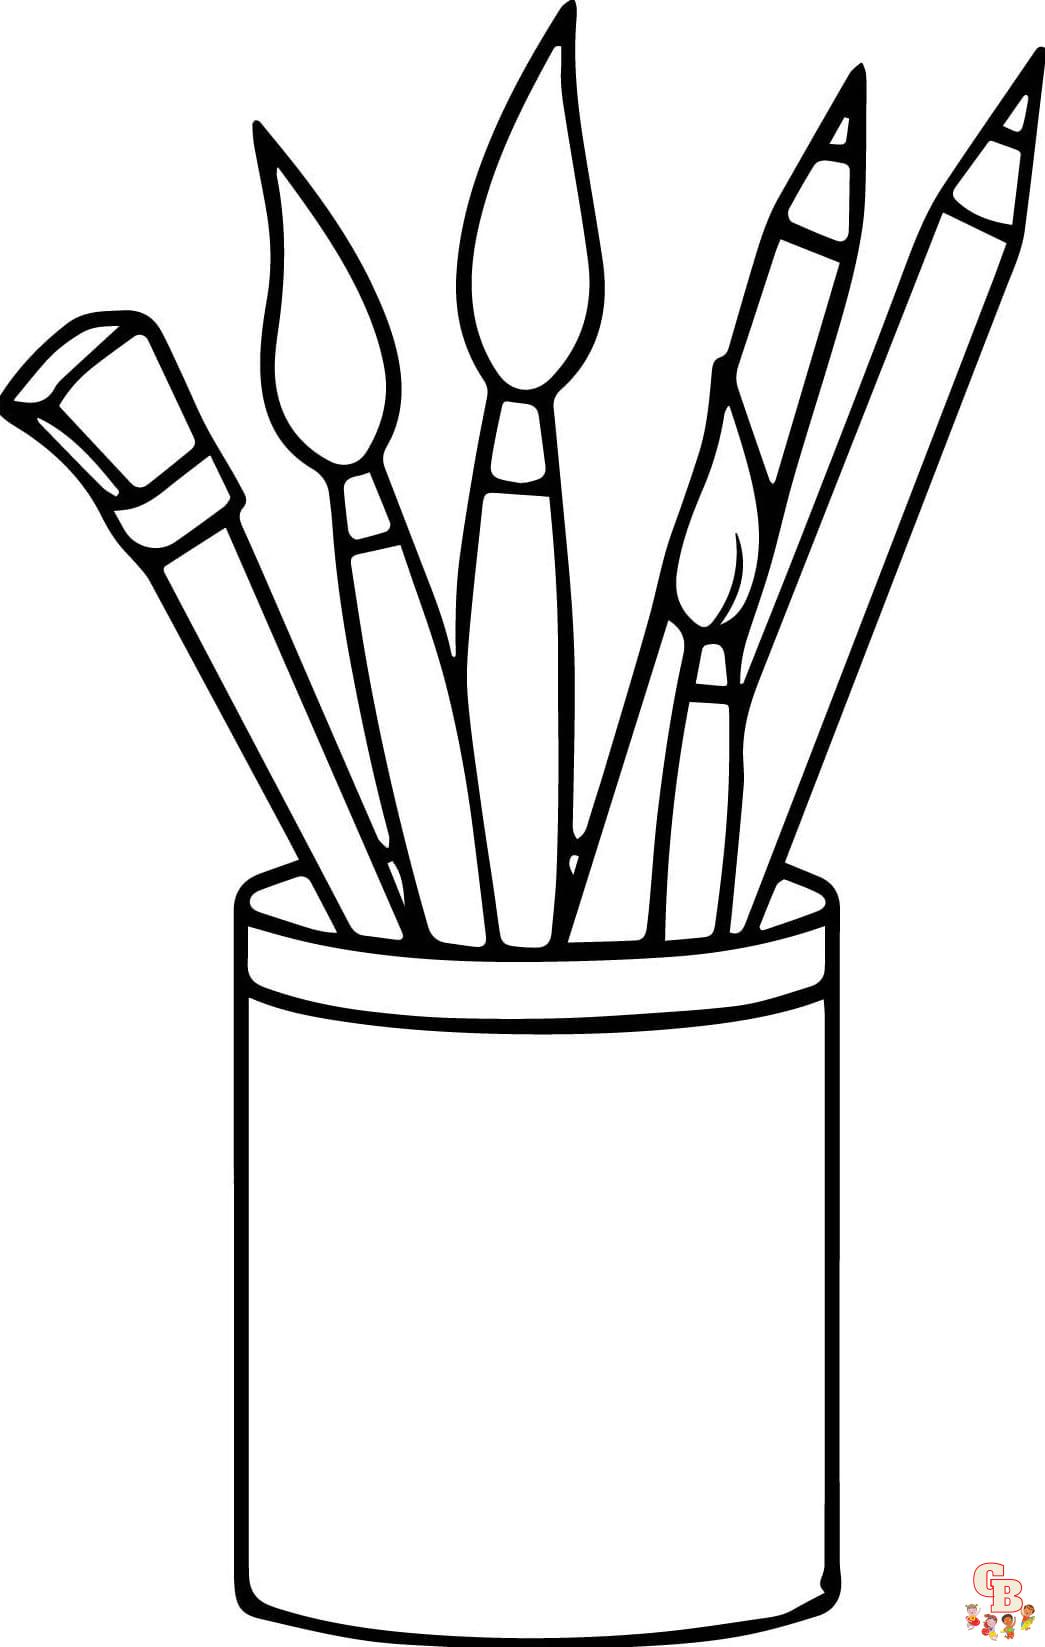 Free Paintbrush coloring pages for kids